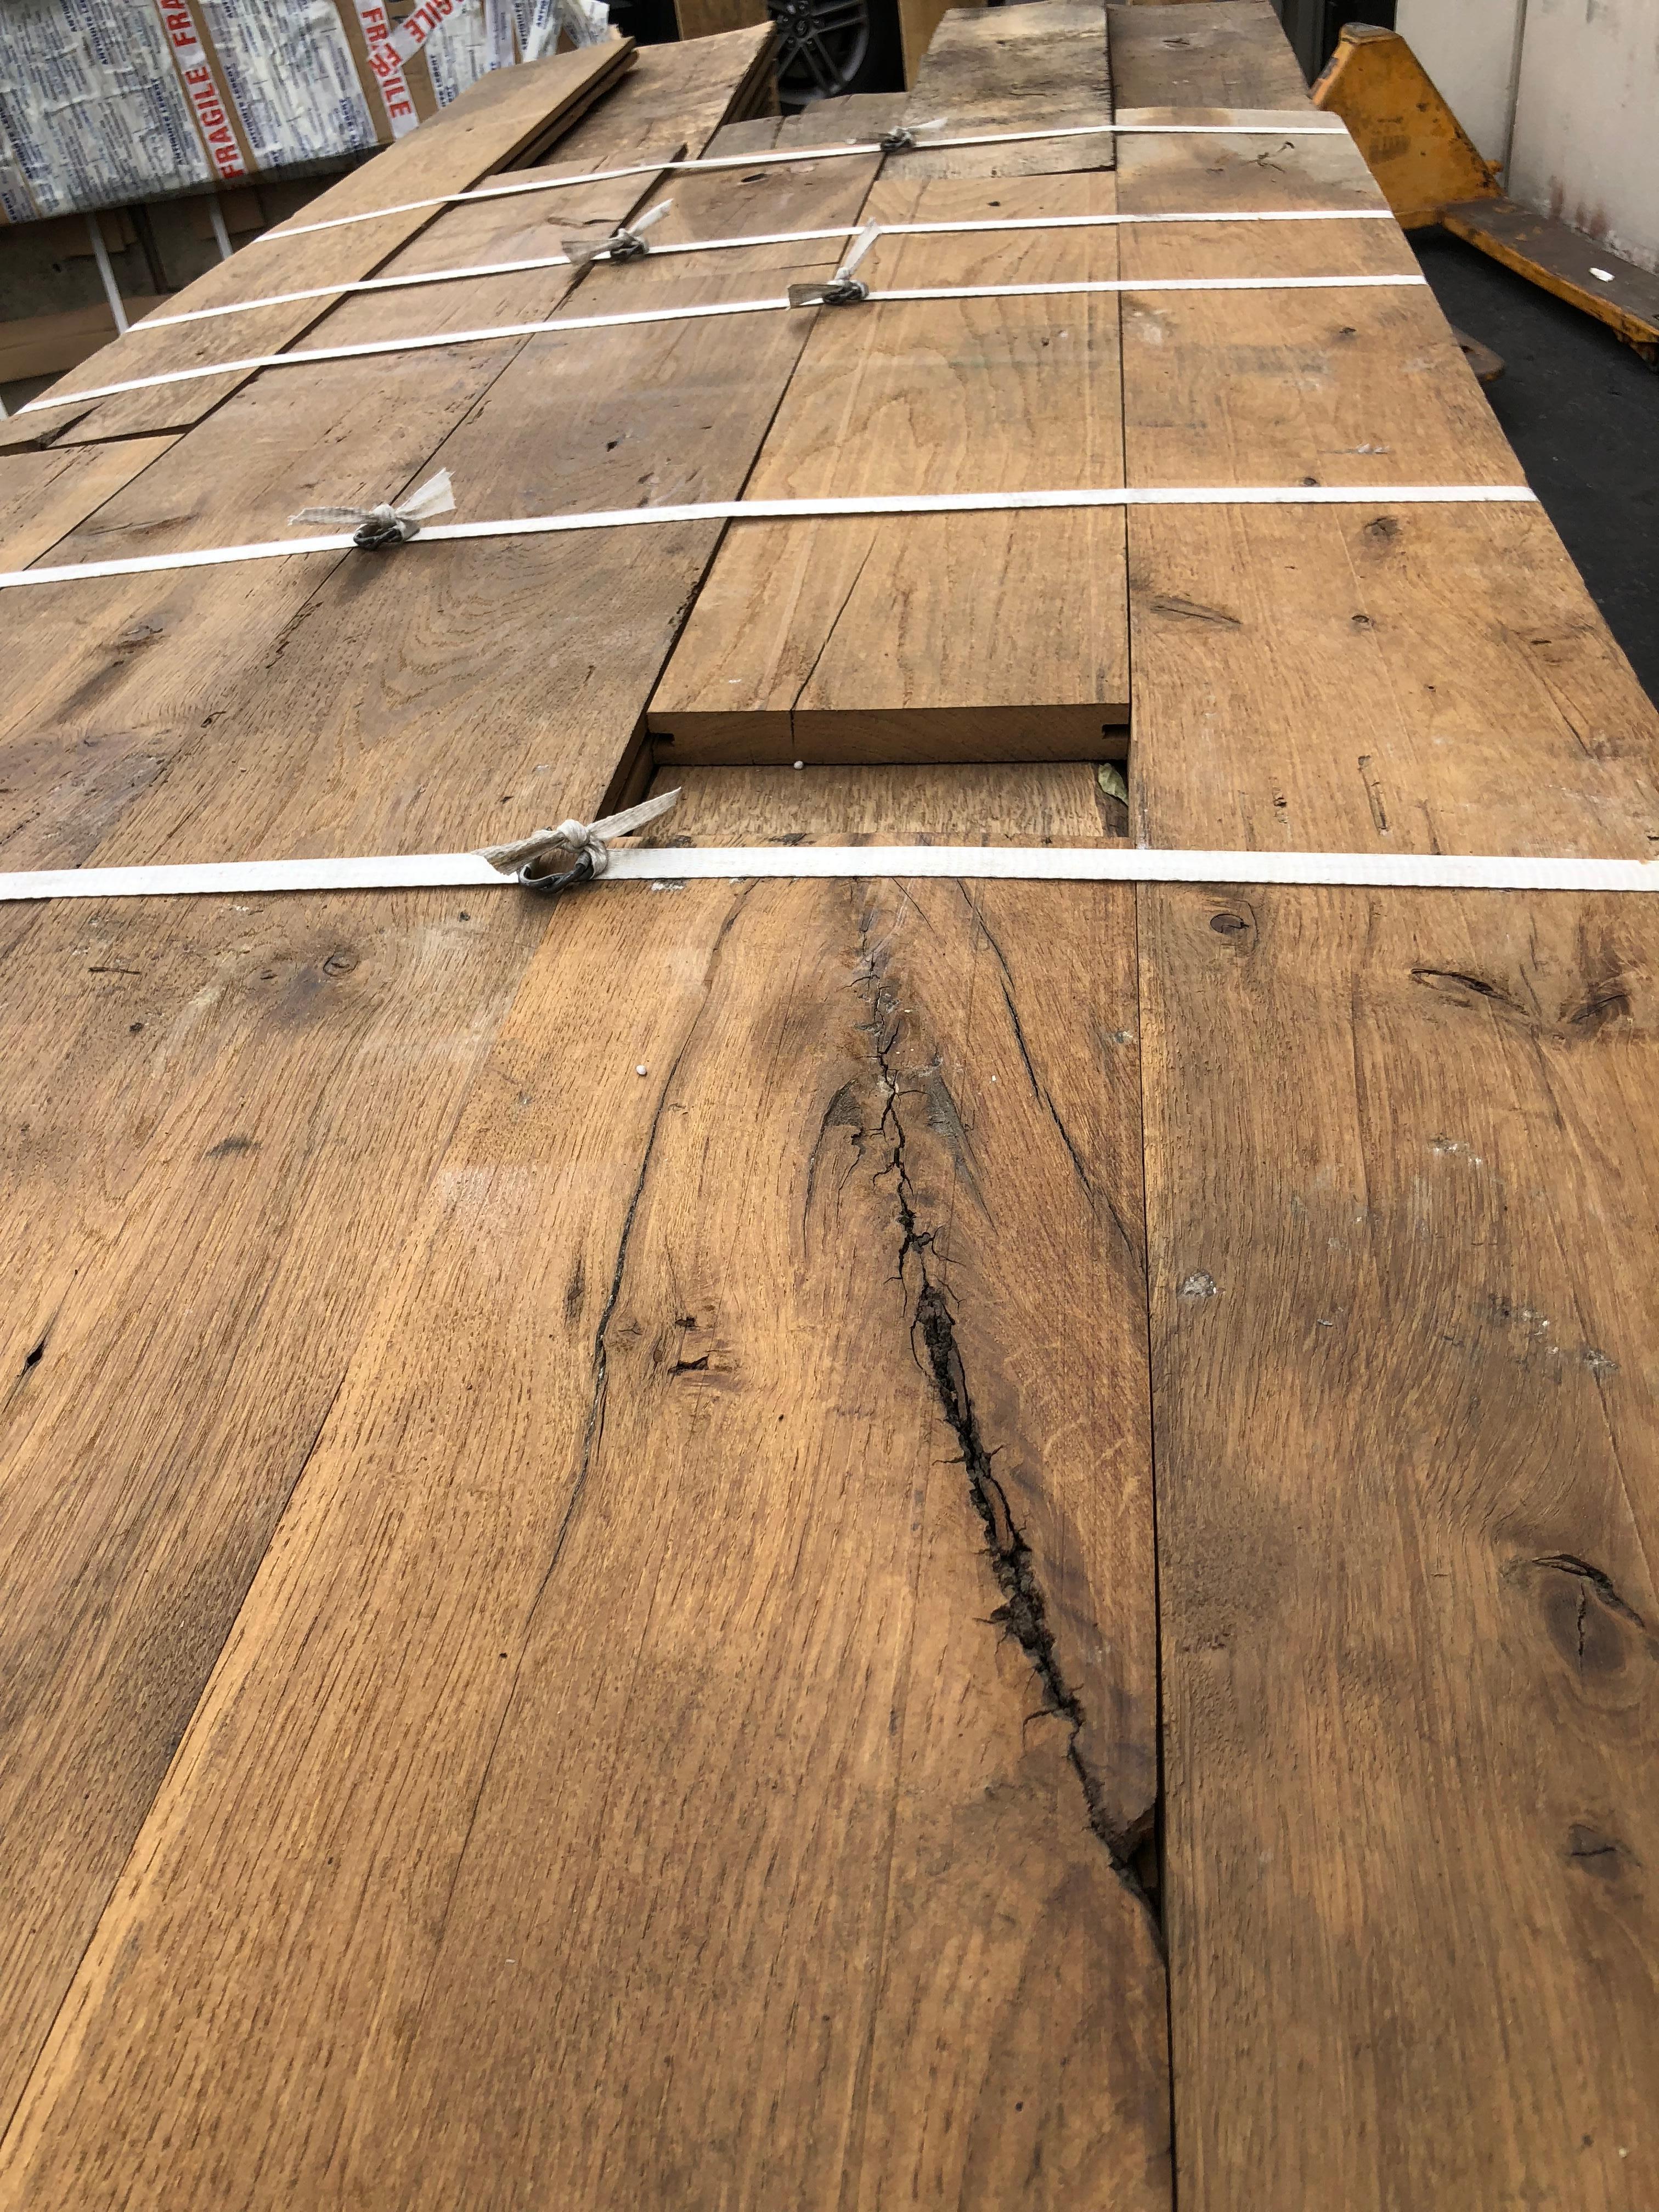 Only 3,500 square feet available right now. Price per square foot. Random dimensions.
Authentic and original French antique solid wood oak flooring, 18th century from France.
Available right now from our location in Los Angeles, California.
Ready